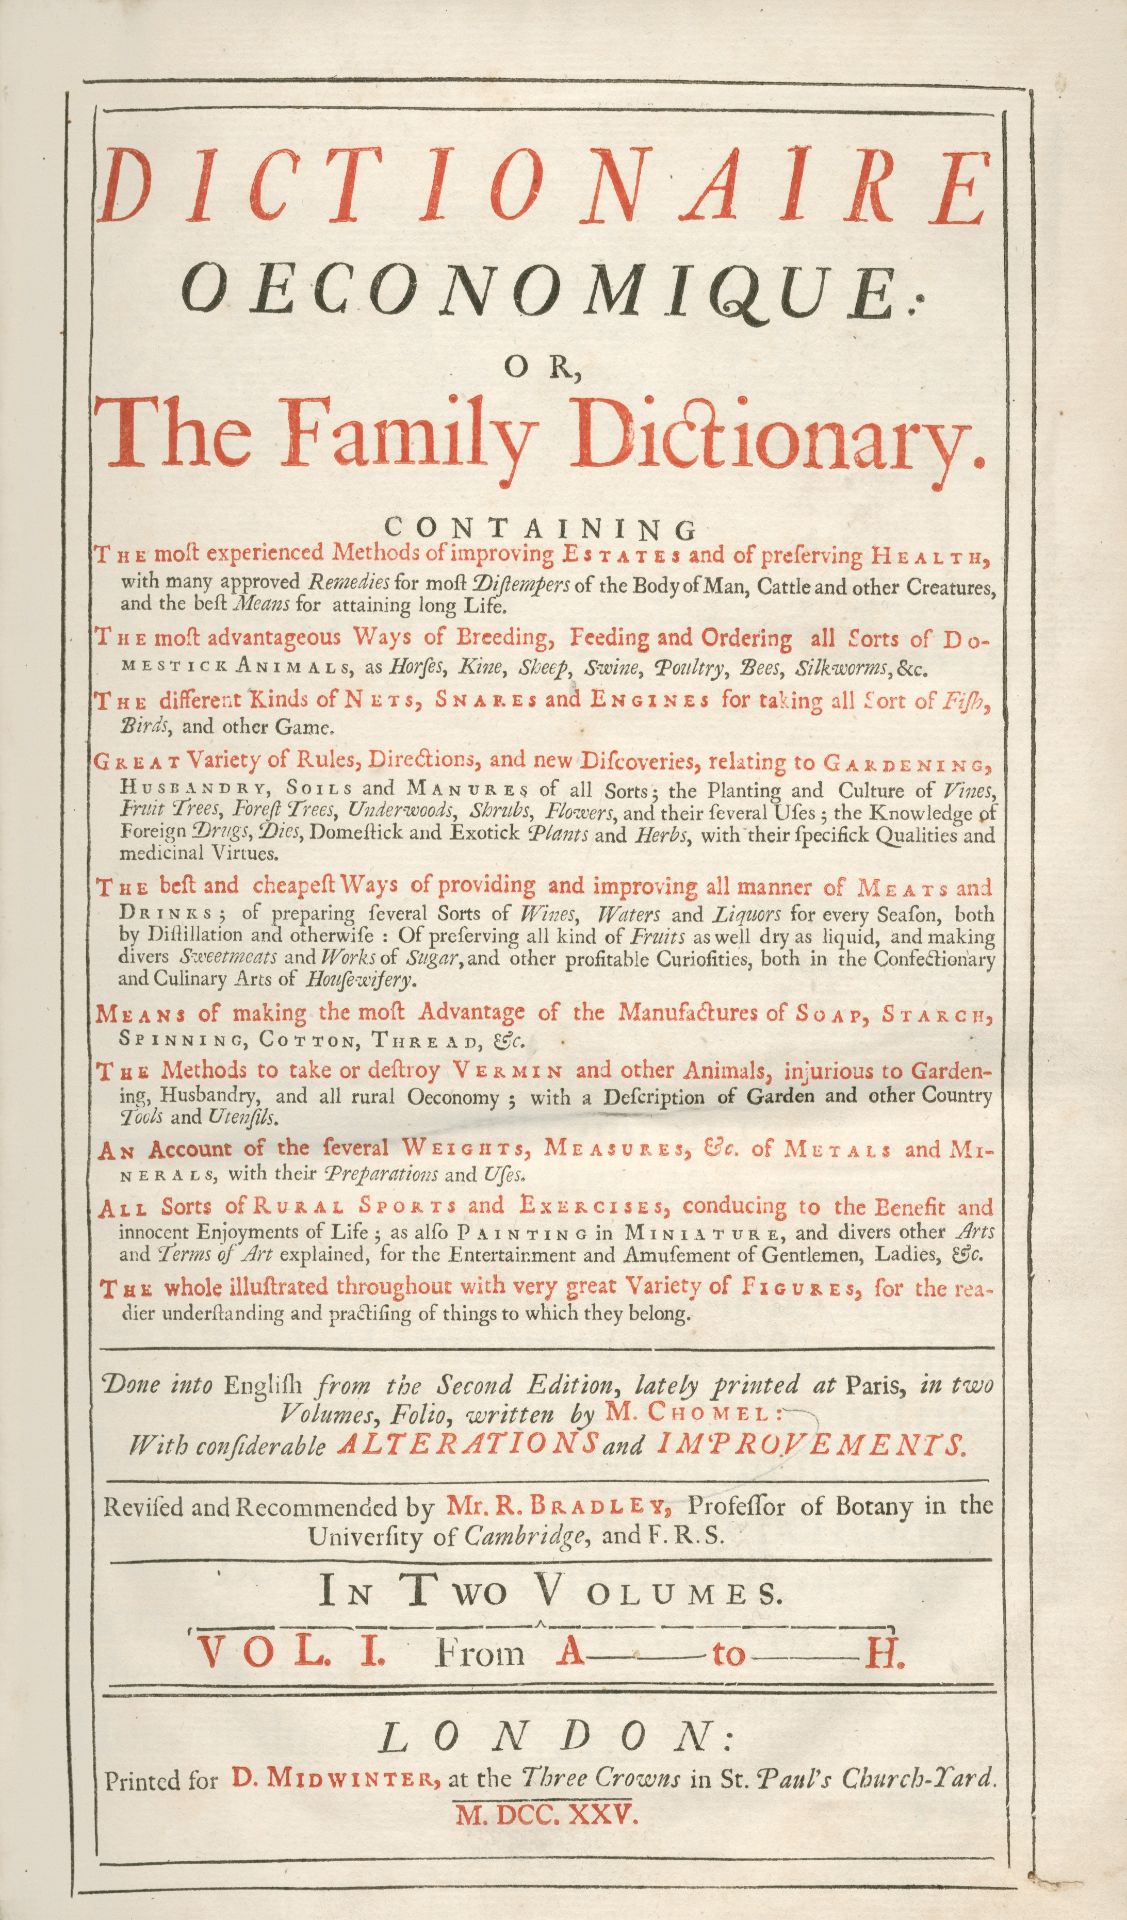 CHOMEL (NOEL) Dictionnaire oeconomique: or, the Family Dictionary. 2 vol. in 1, D. Midwinter, 1725